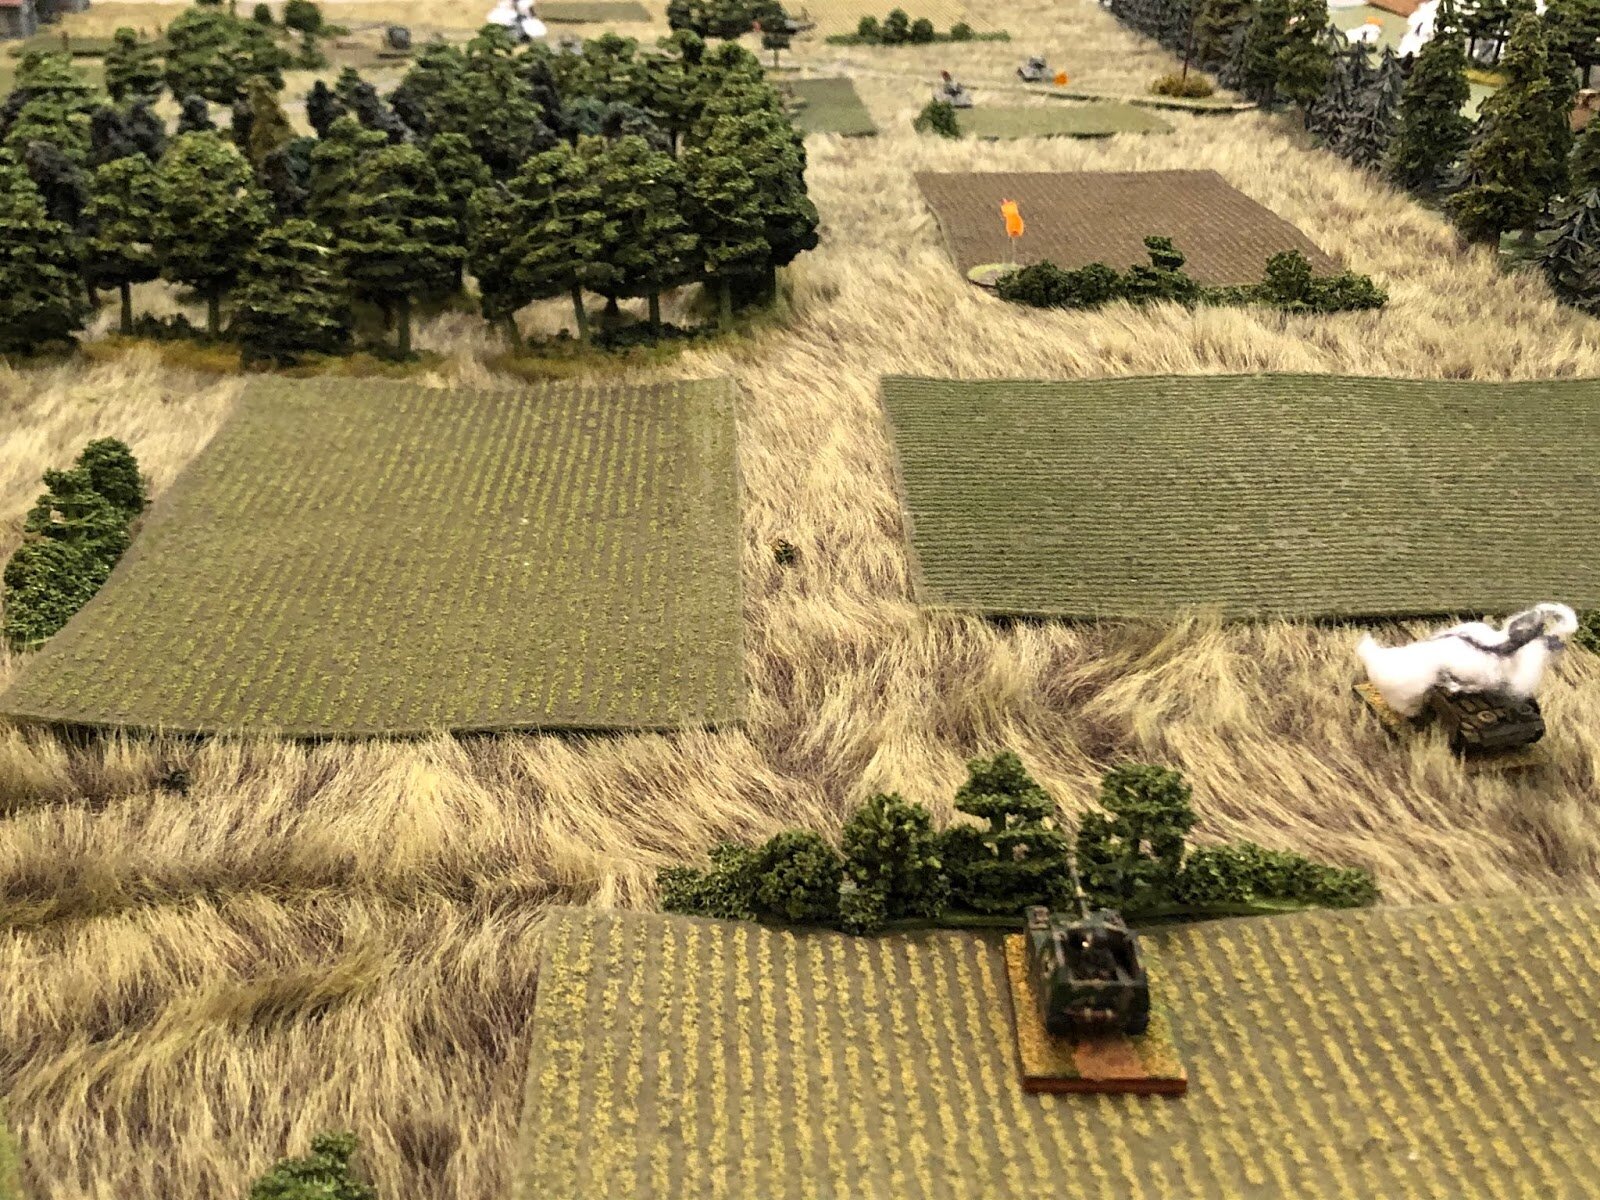  As the Marder (bottom right) fires on 1st Tank Platoon (top right). 